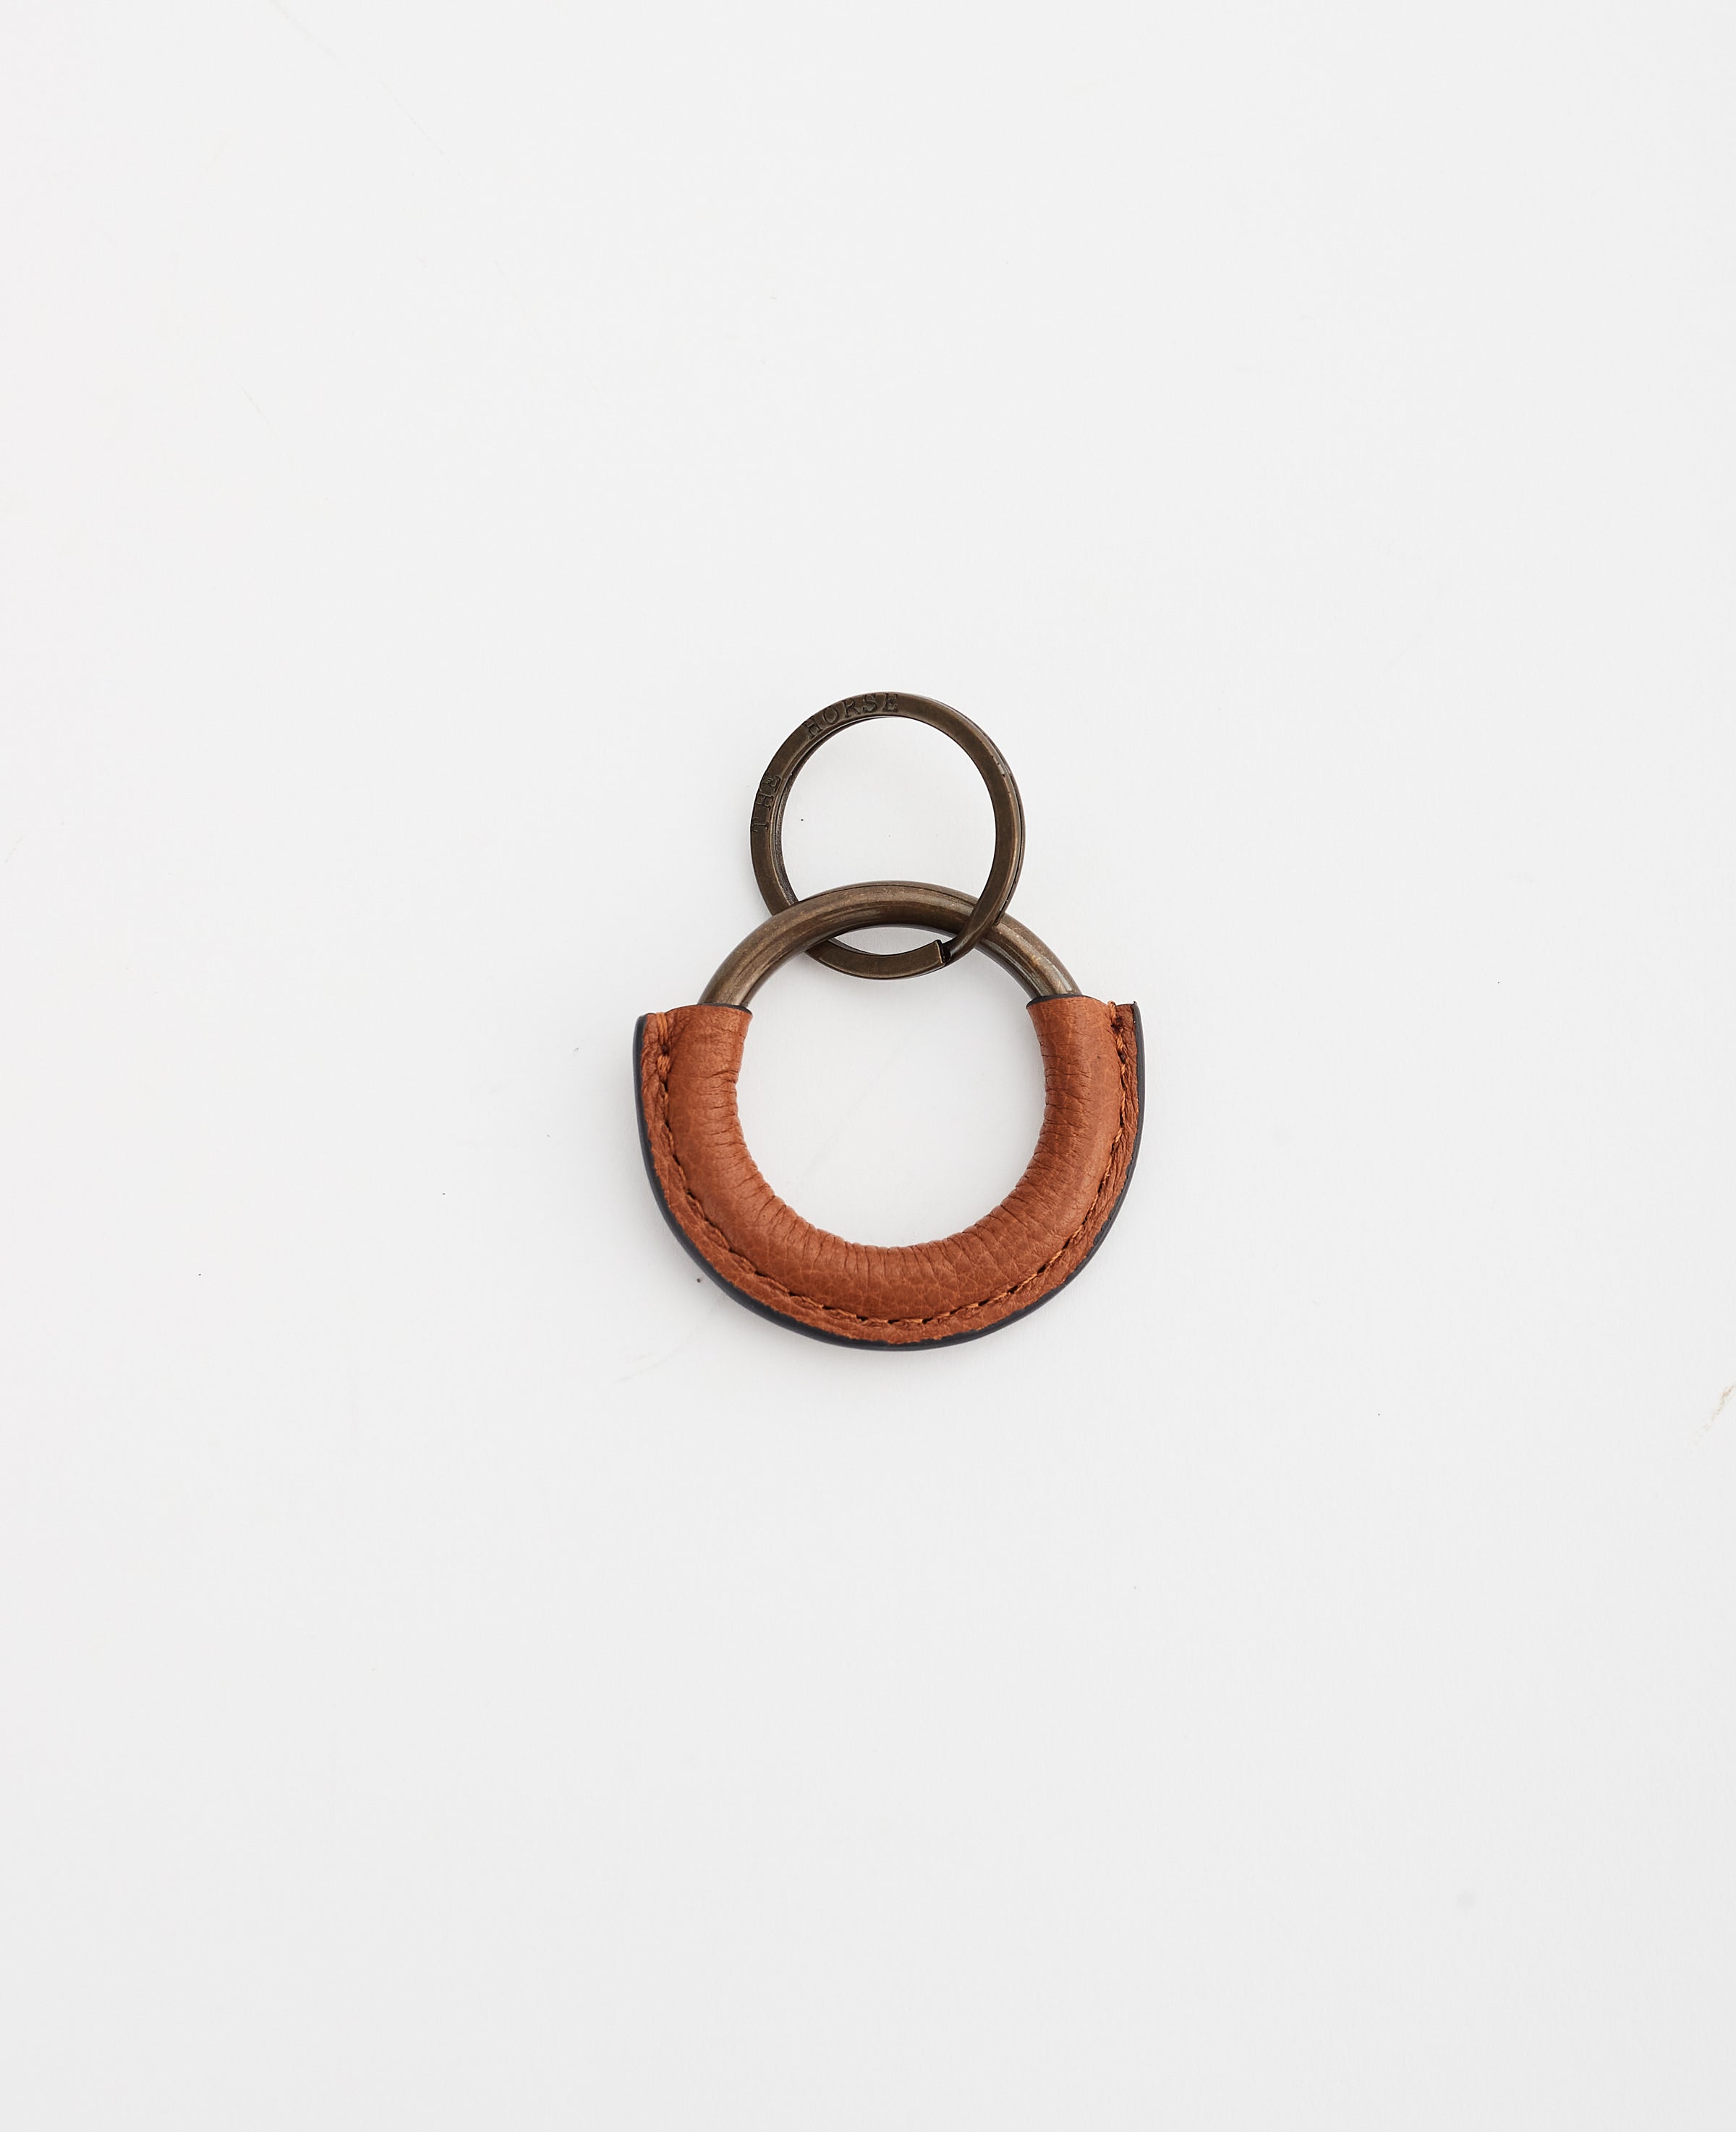 The Key Ring in Tan Leather by The Horse®